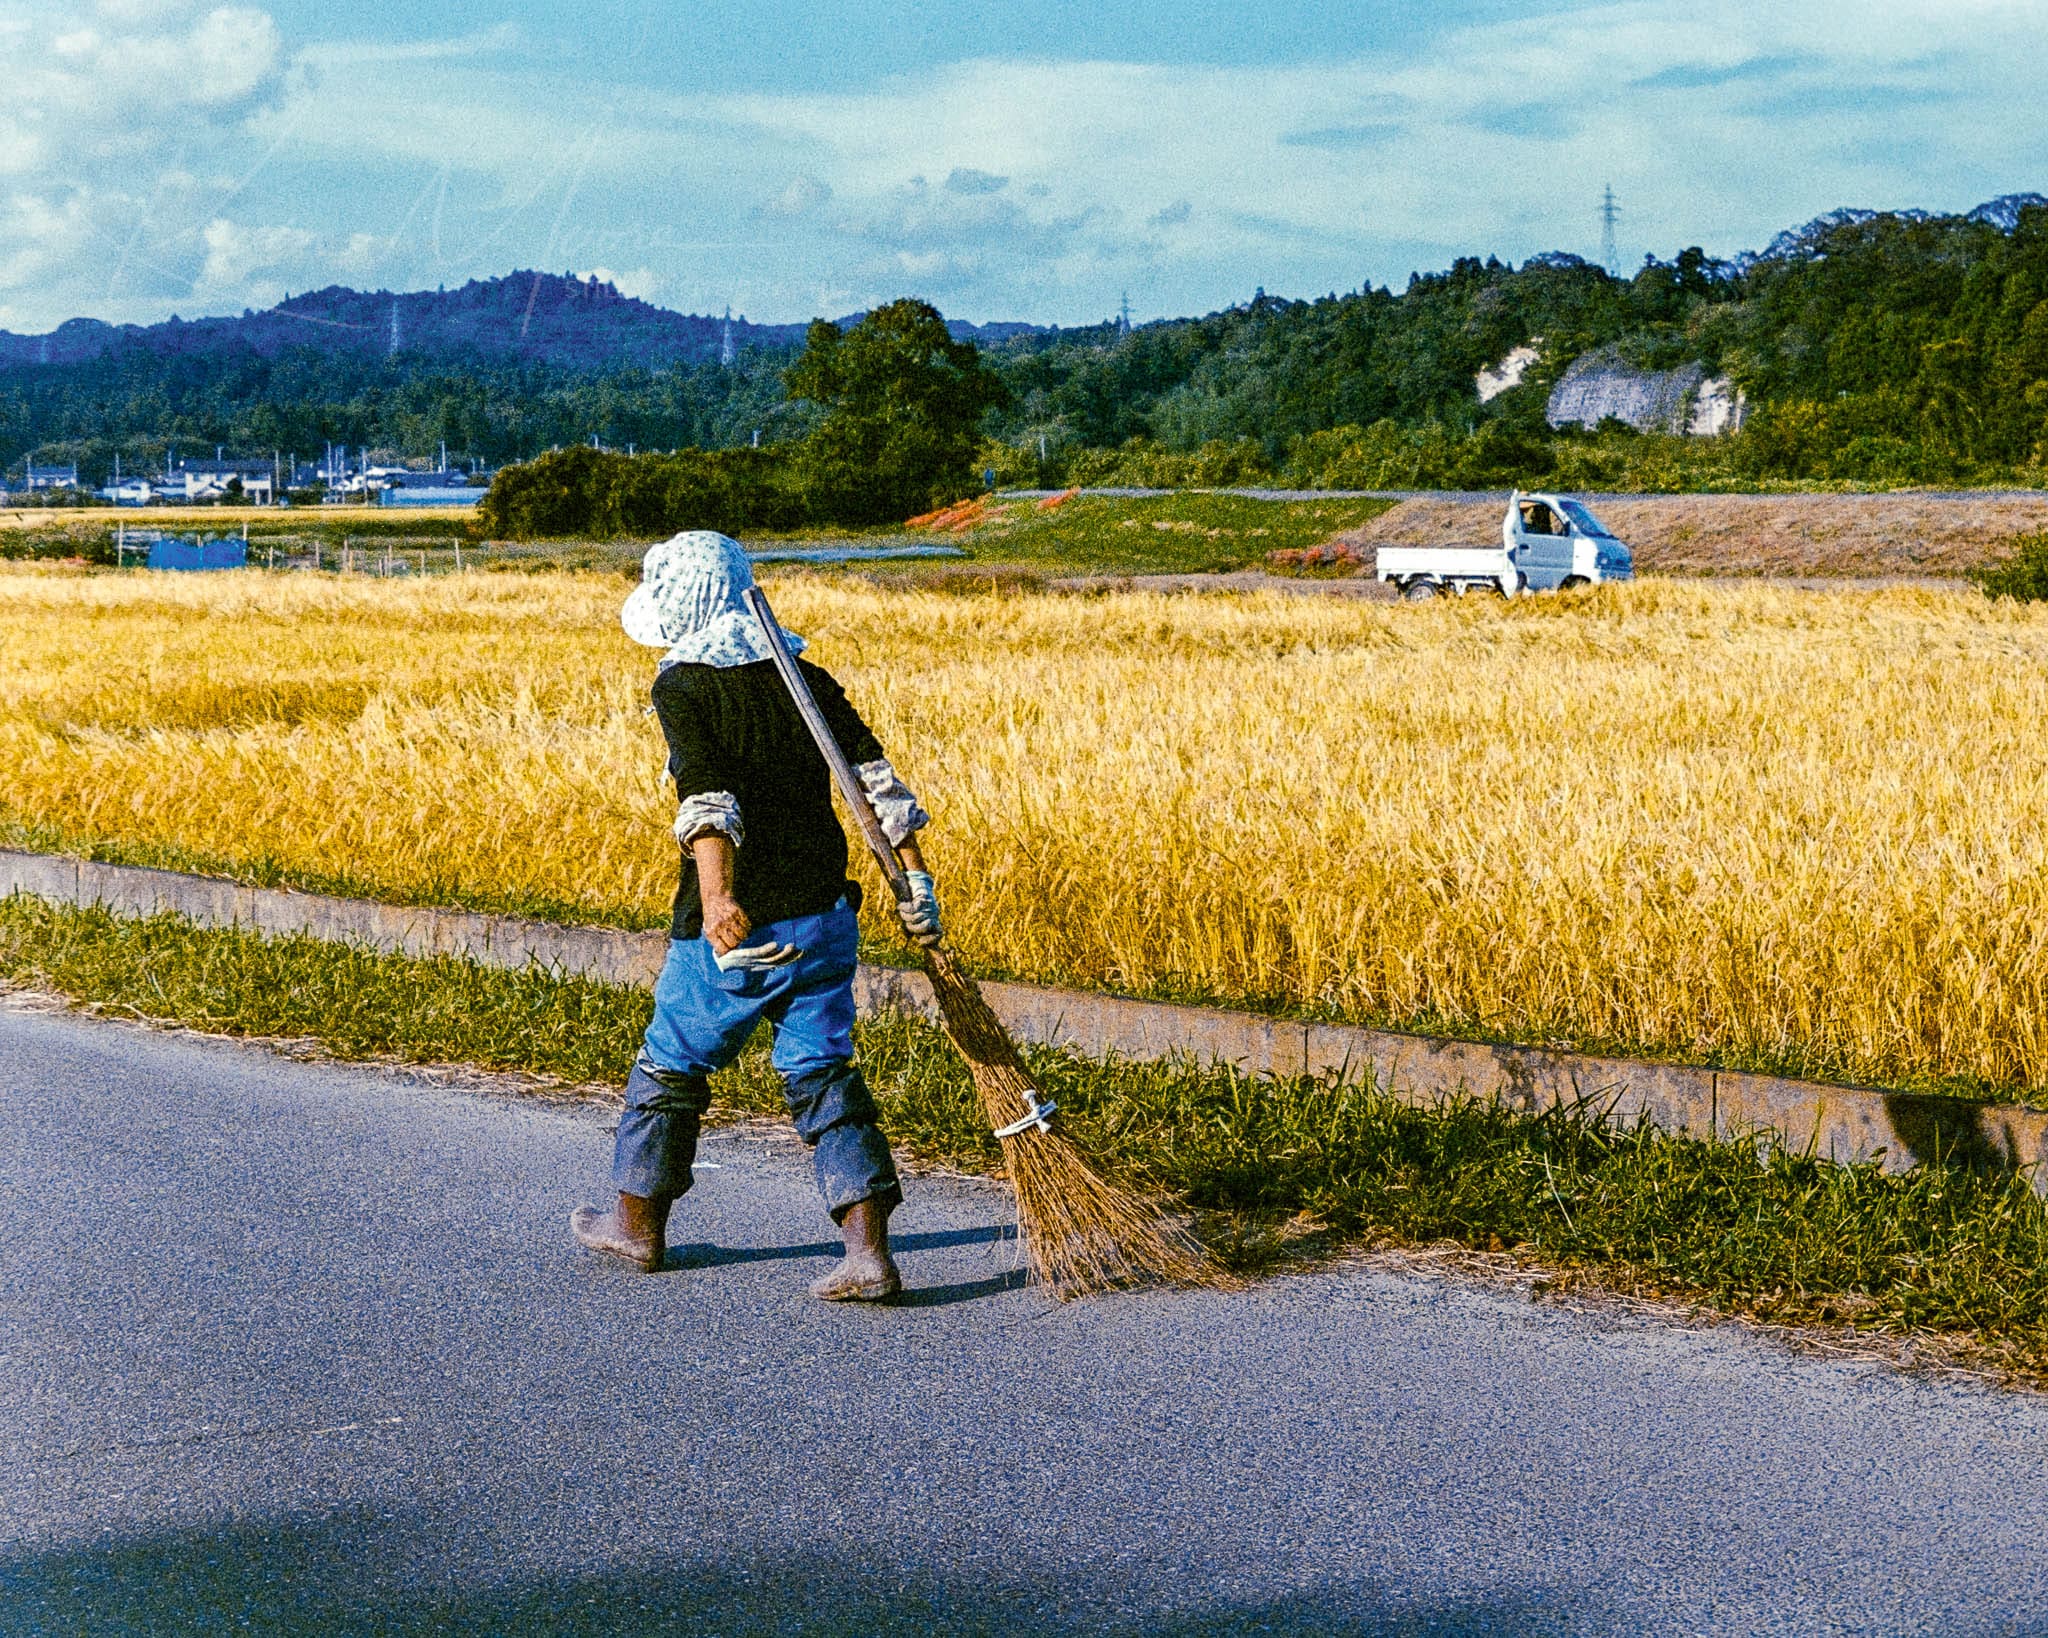 Strolling casually on a road amidst golden harvest fields and serene rural scenery.